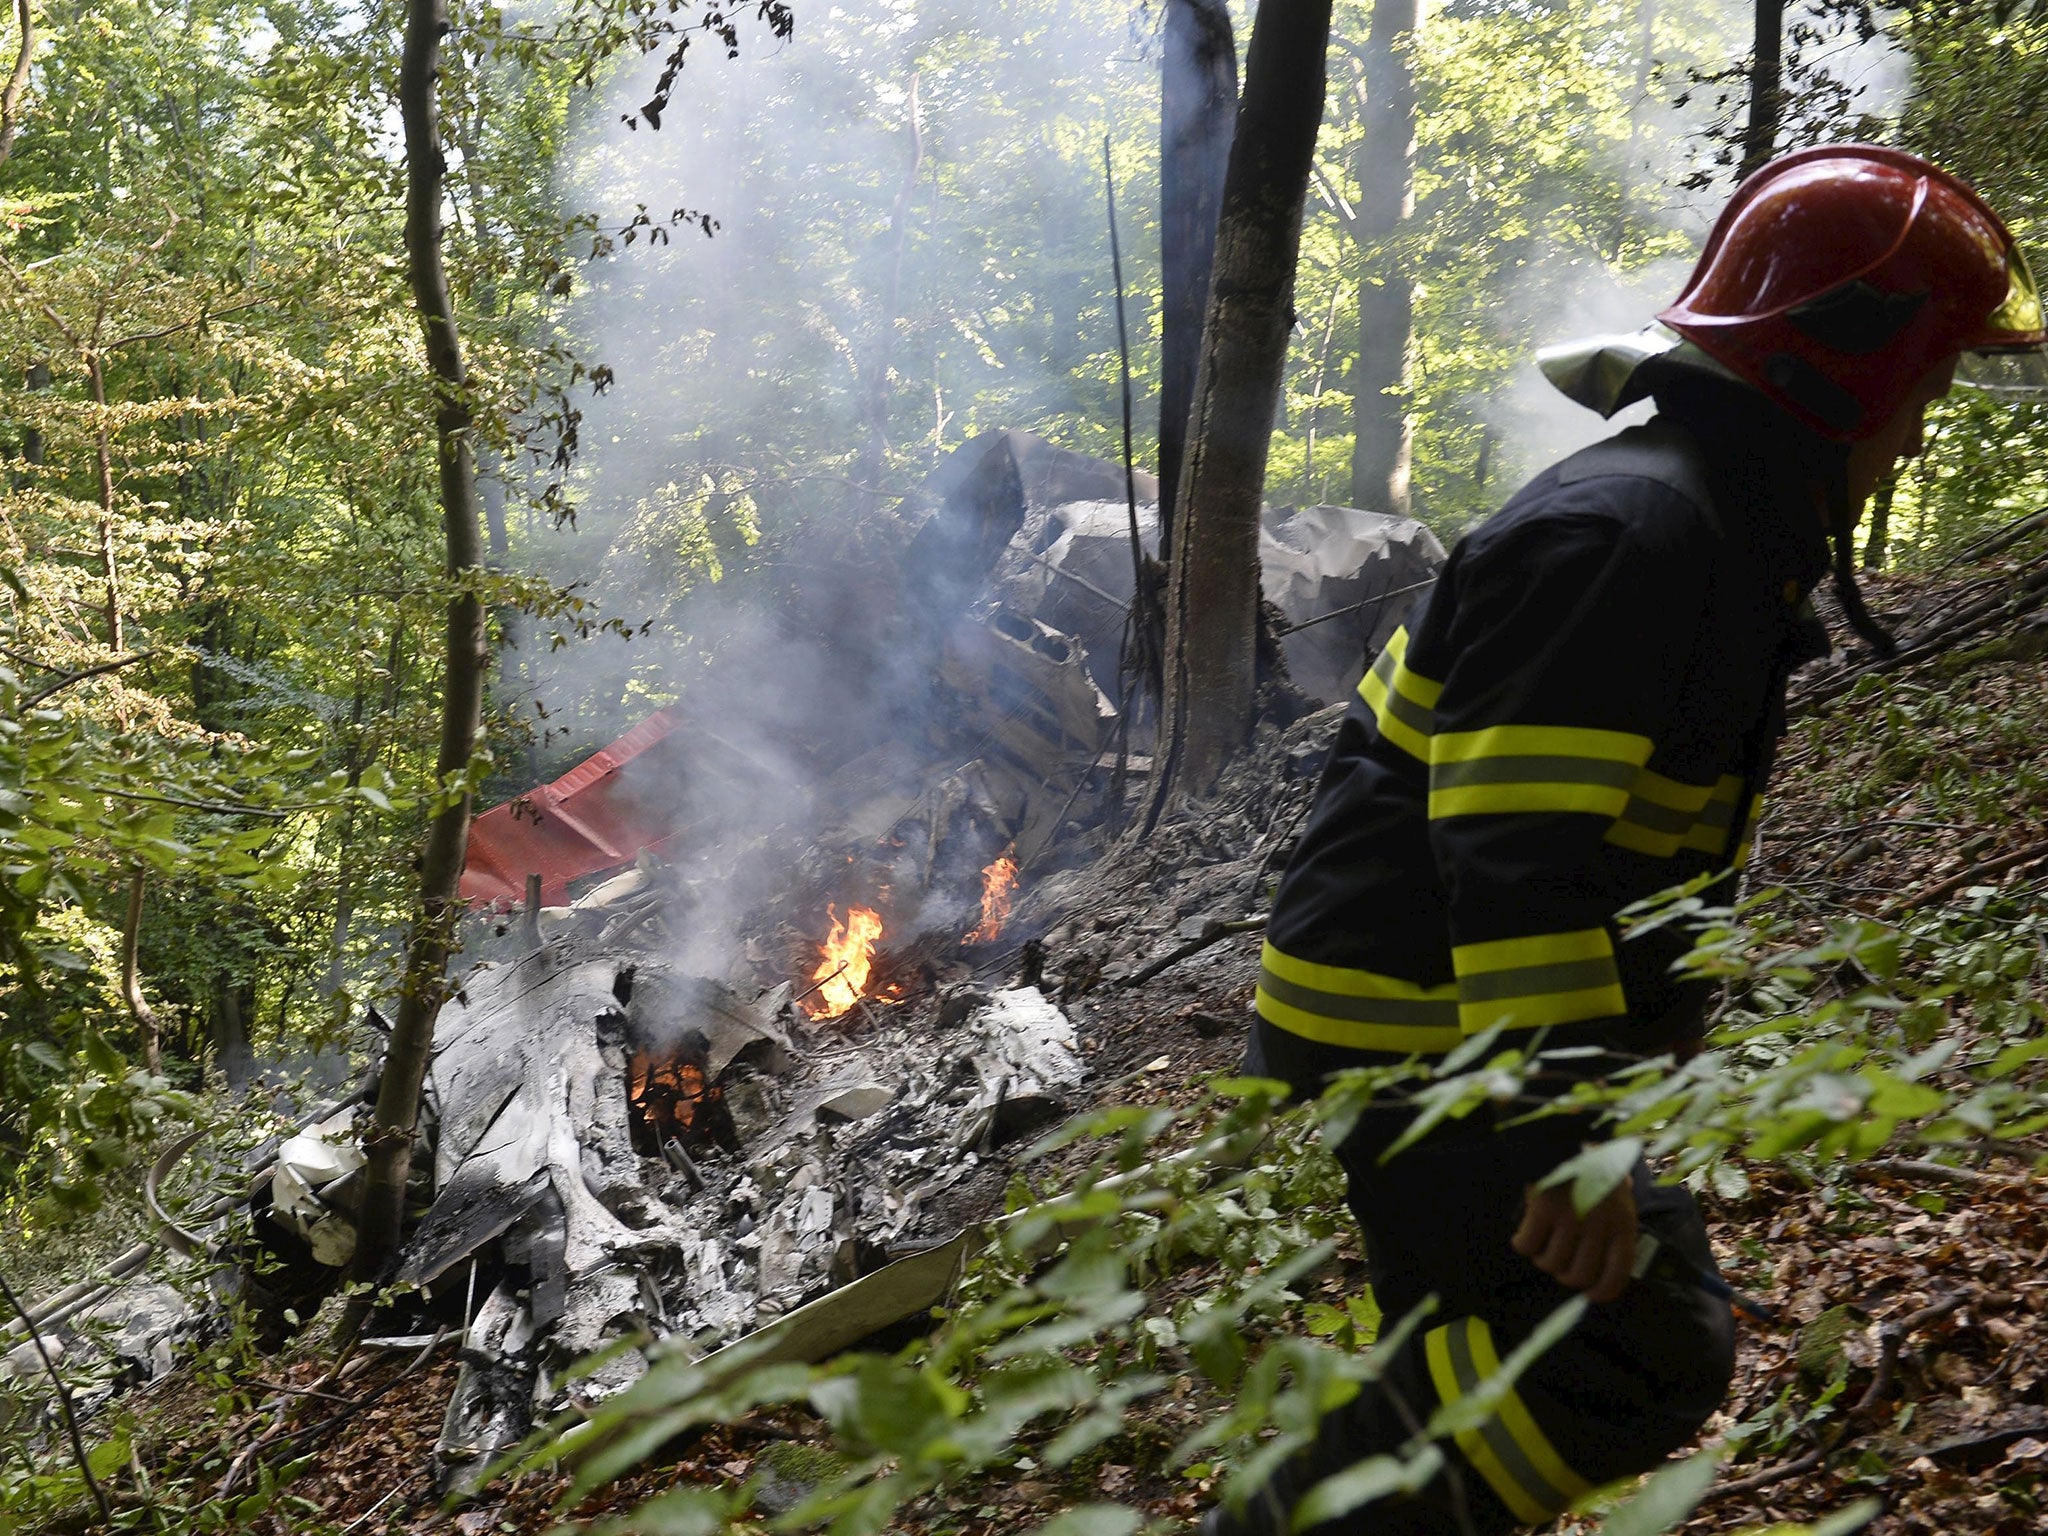 A firefighter inspects the crash site of two sport planes near the village of Cerveny Kamen, Slovakia, August 20, 2015